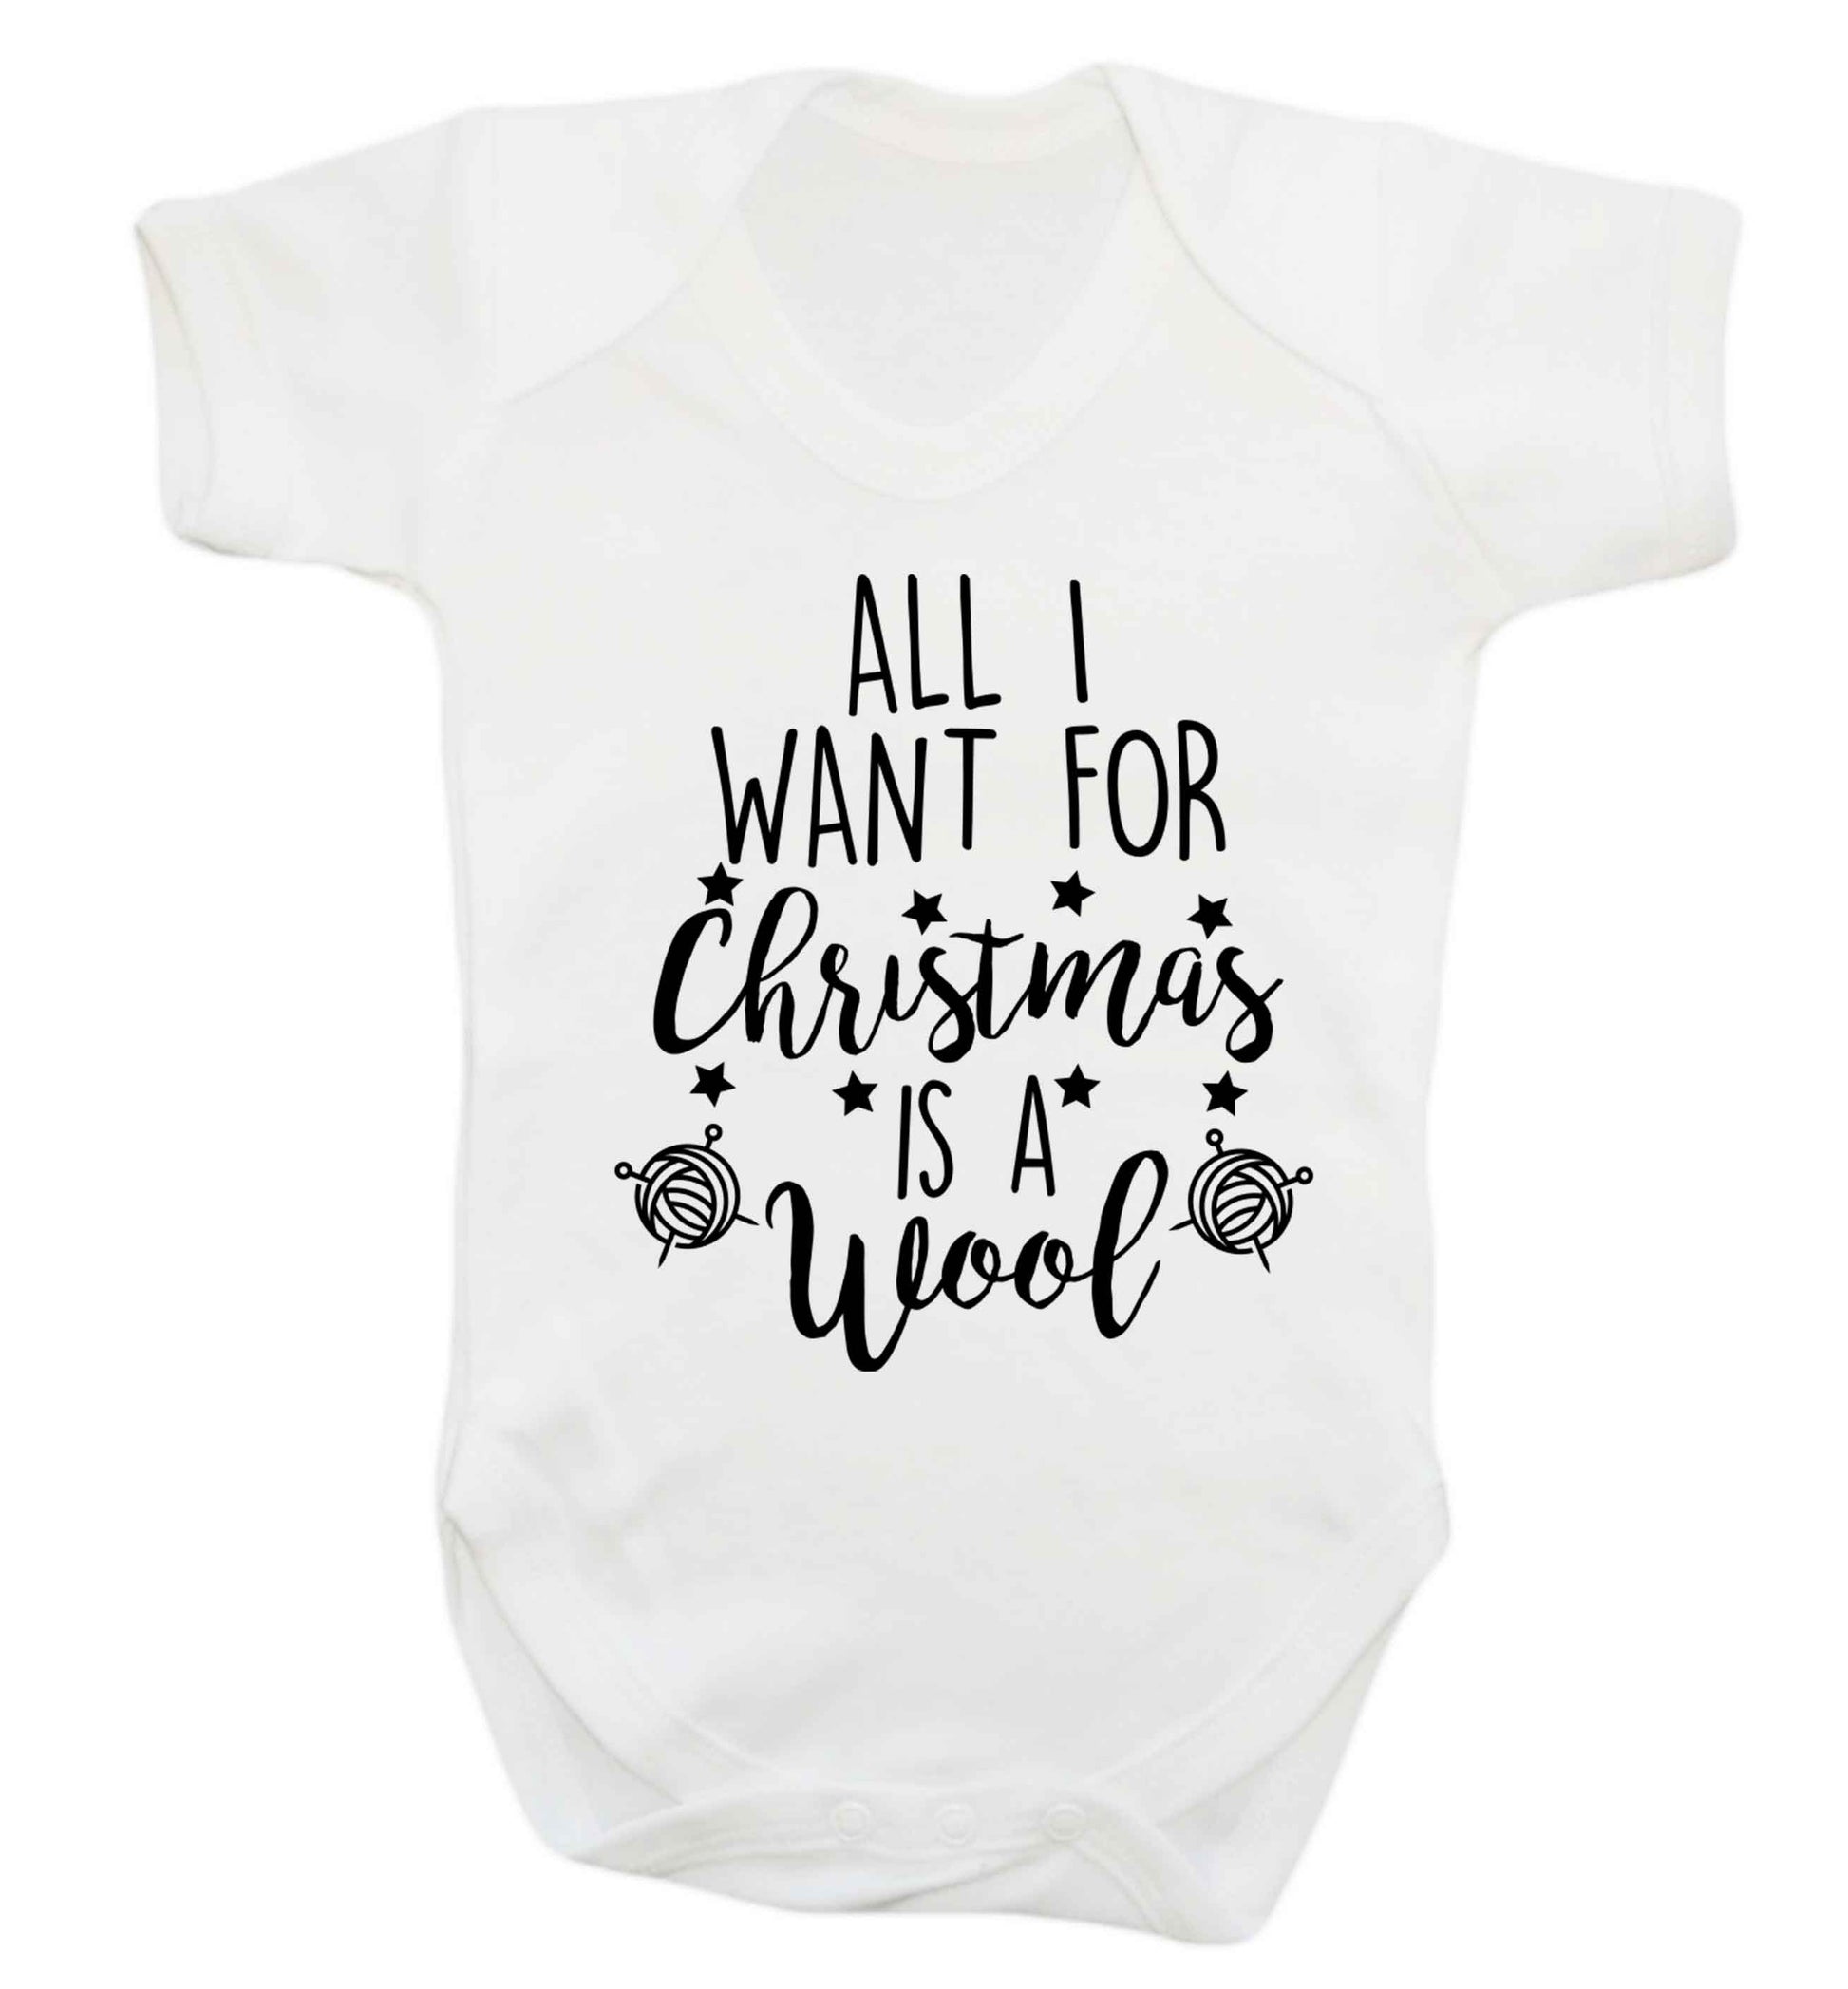 All I want for Christmas is wool! Baby Vest white 18-24 months